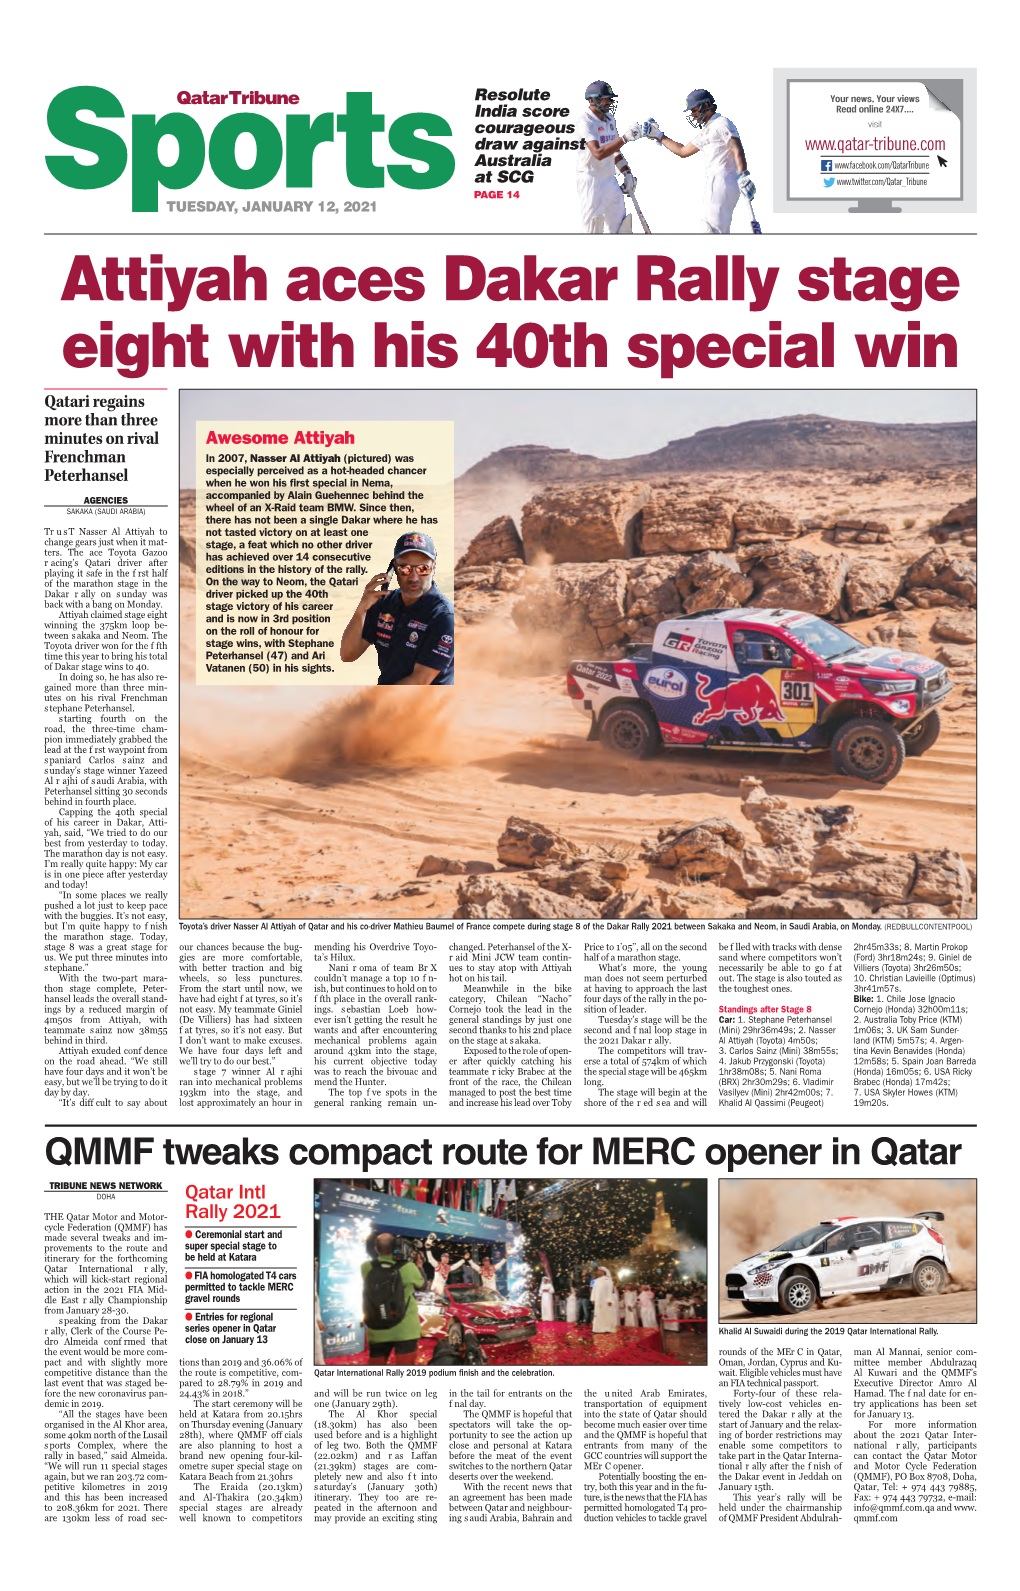 Attiyah Aces Dakar Rally Stage Eight with His 40Th Special